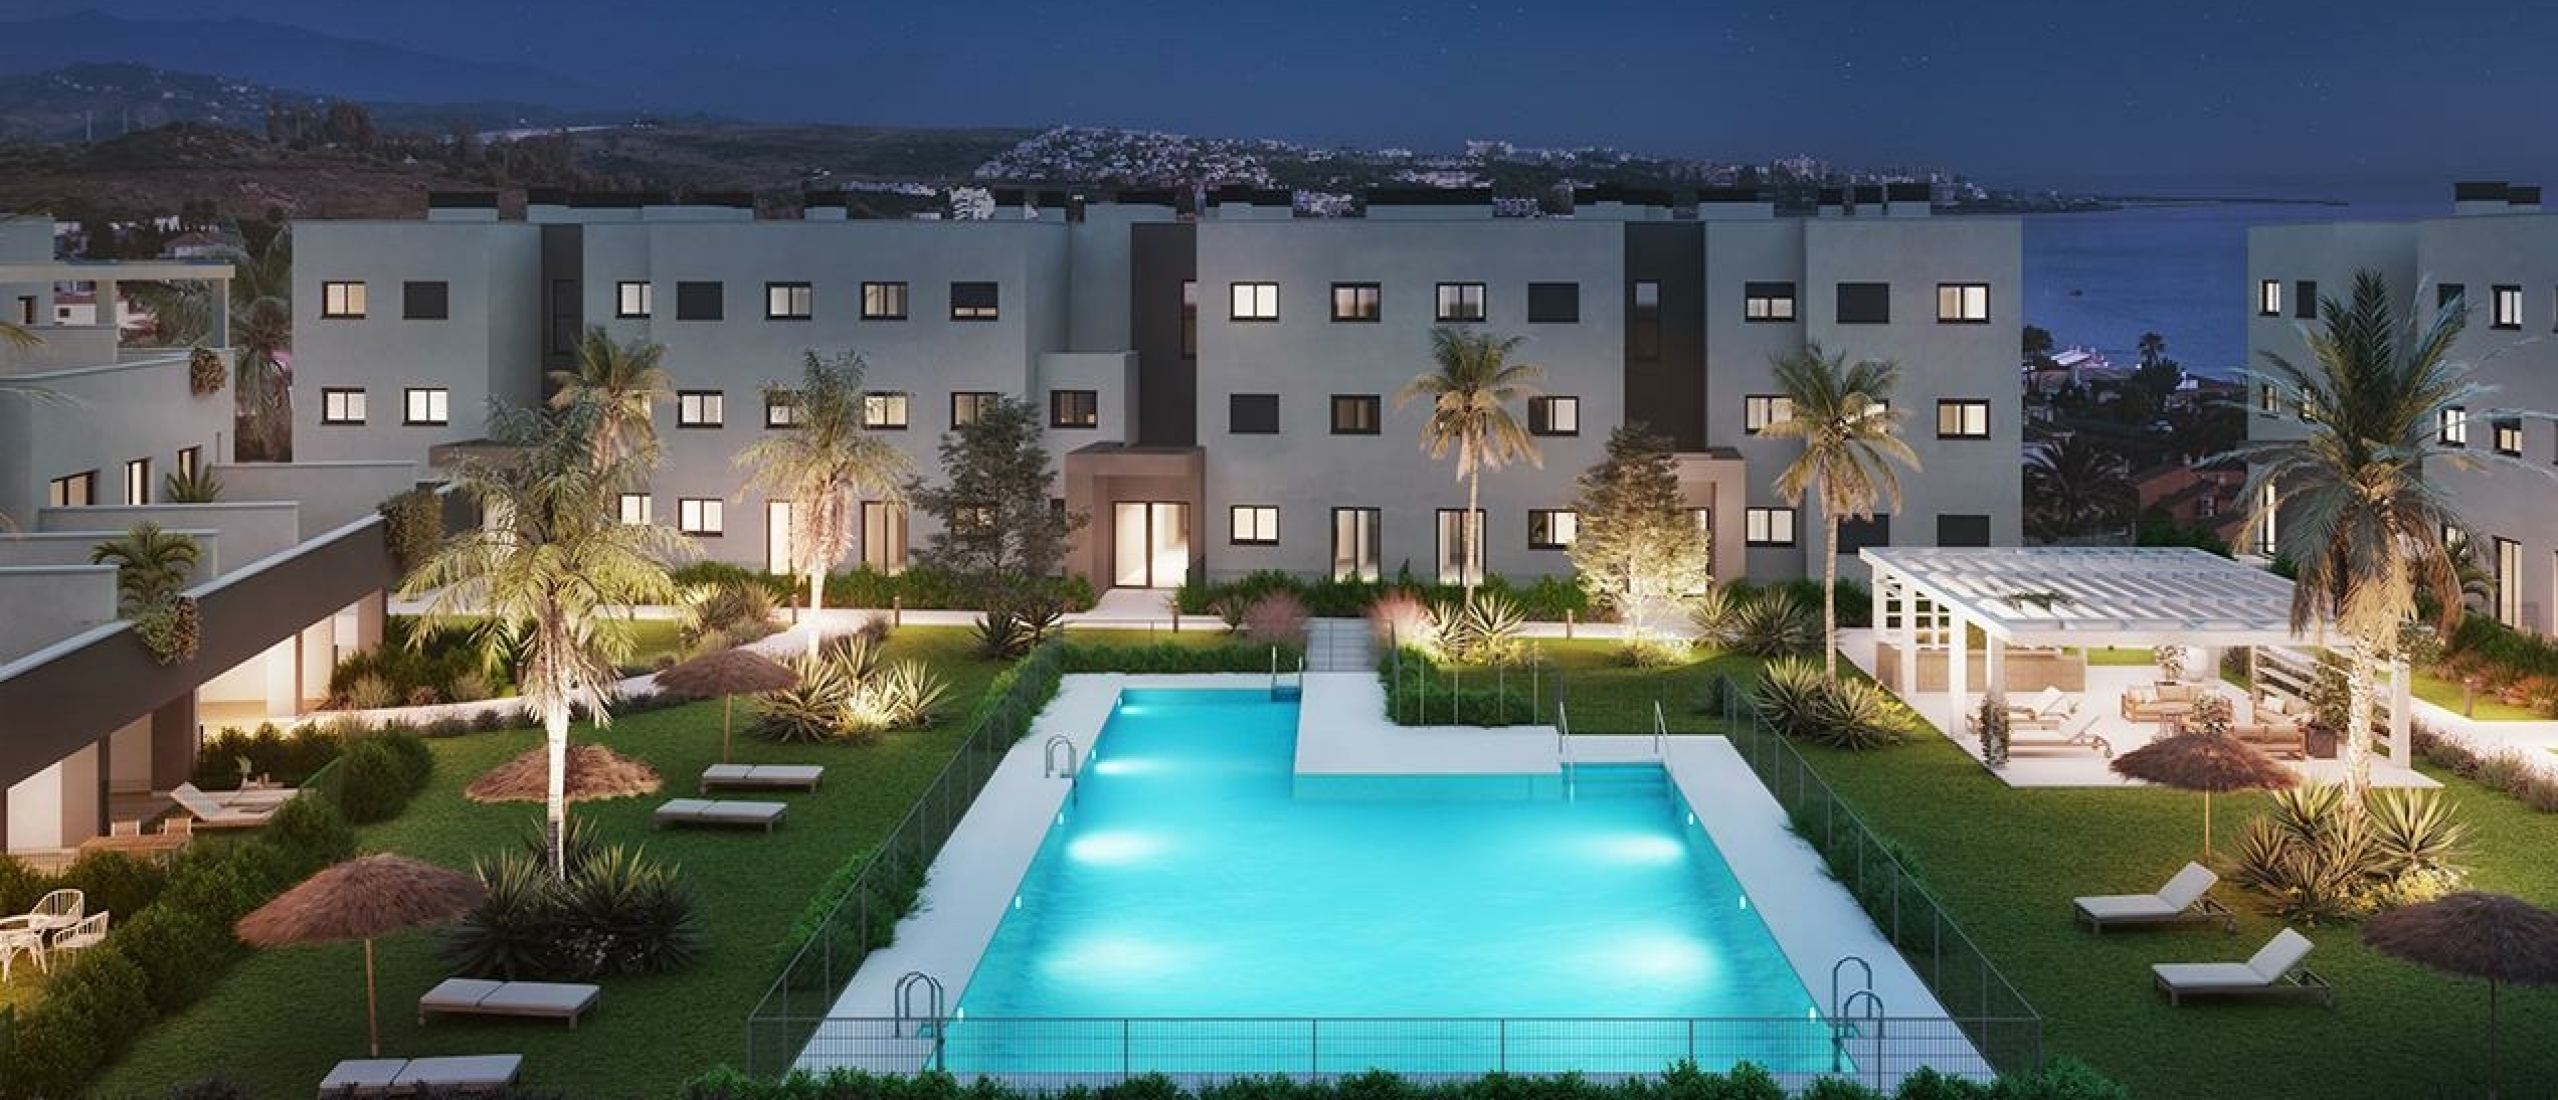 Estepona - Modern Off-Plan apartments in a vibrant gated residential complex.